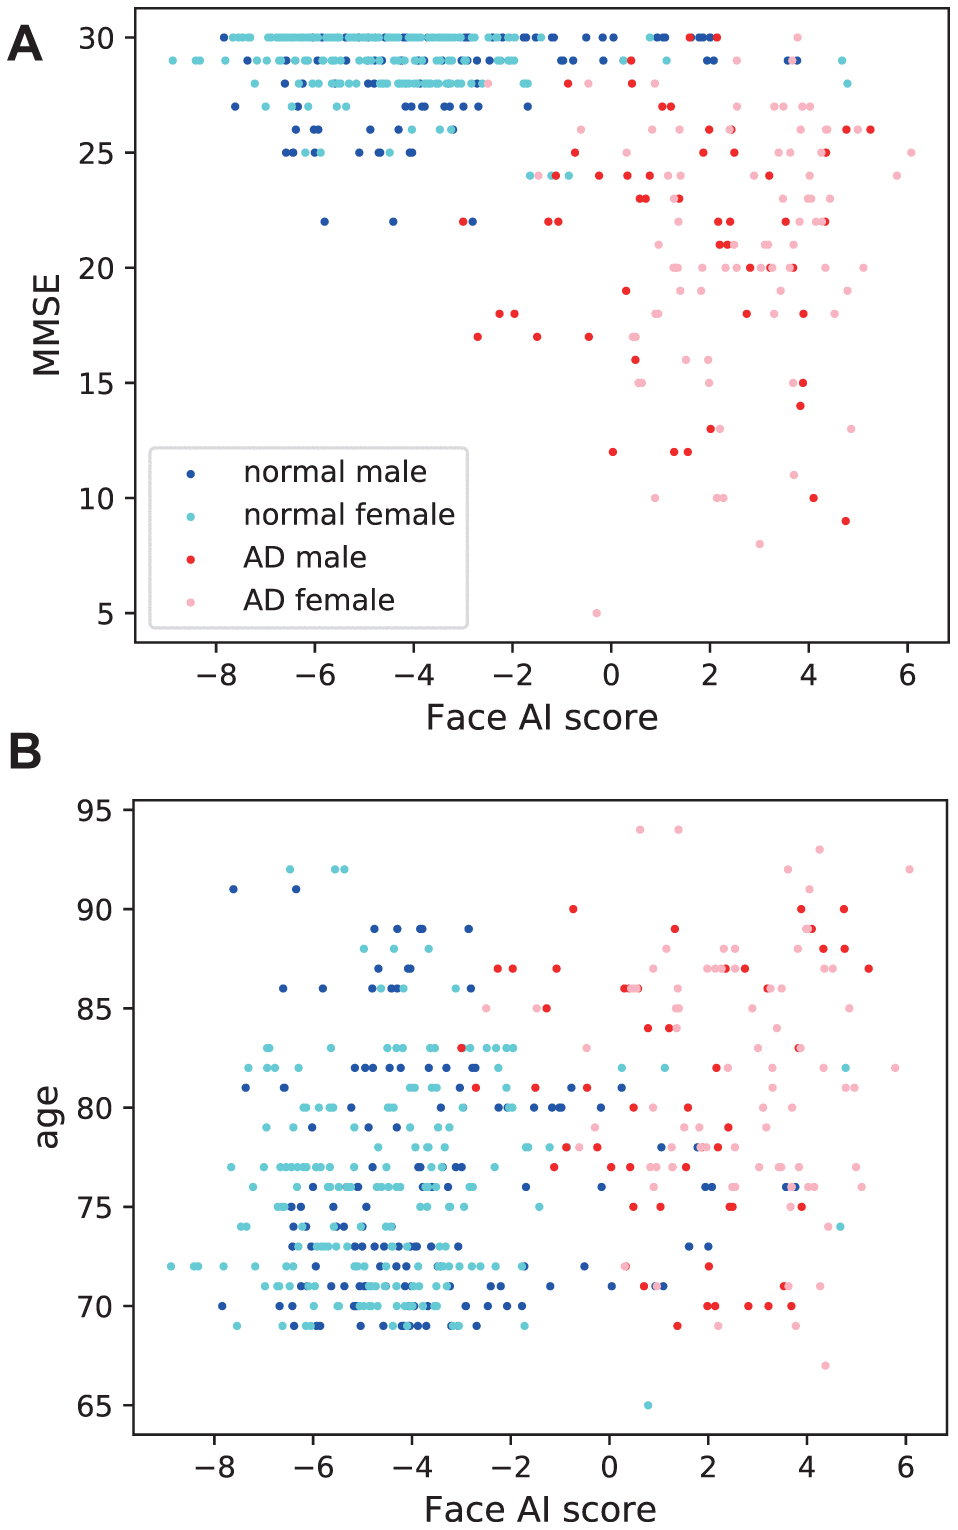 Association of Face AI score with (A) MMSE and (B) chronological age. Face AI score correlated closely with (a) MMSE (r = −0.599, t = −16.40, p = 2.47×10−48) and relatively weakly with (b) age (r = 0.321, t = 7.44, p = 4.57 × 10−13). The Steiger’s test found the difference in correlation coefficients to be significant (p = 3.25 × 10−35).